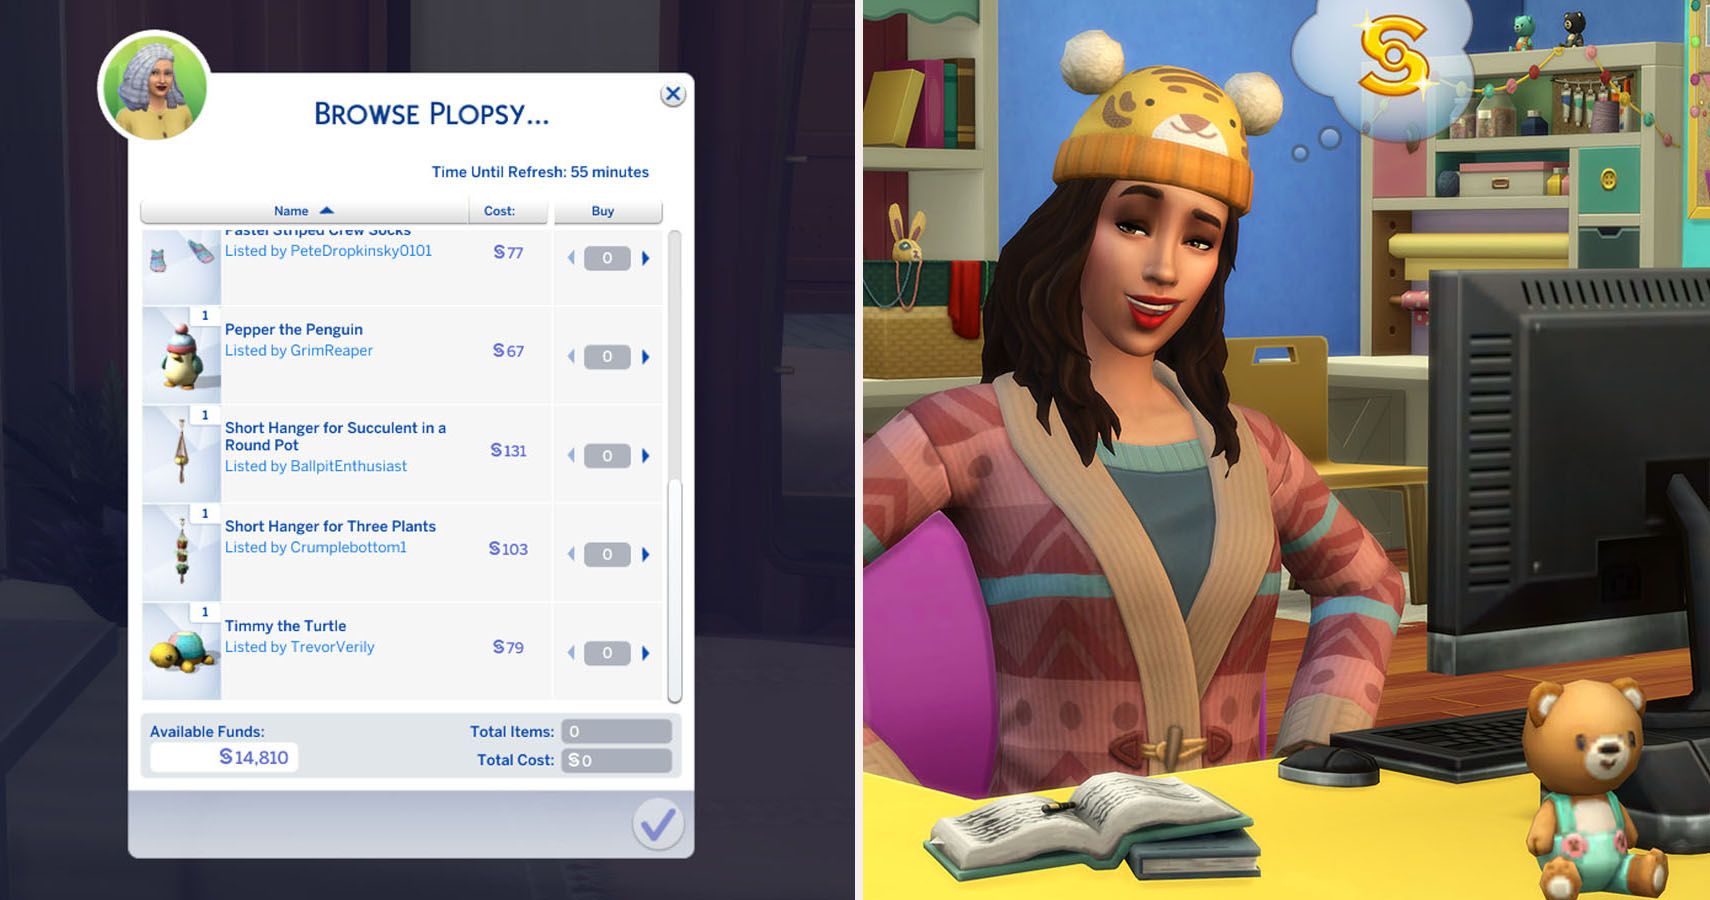 The Sims 4: Nifty Knitting 6 Things We Love About Plopsy (& 4 Features